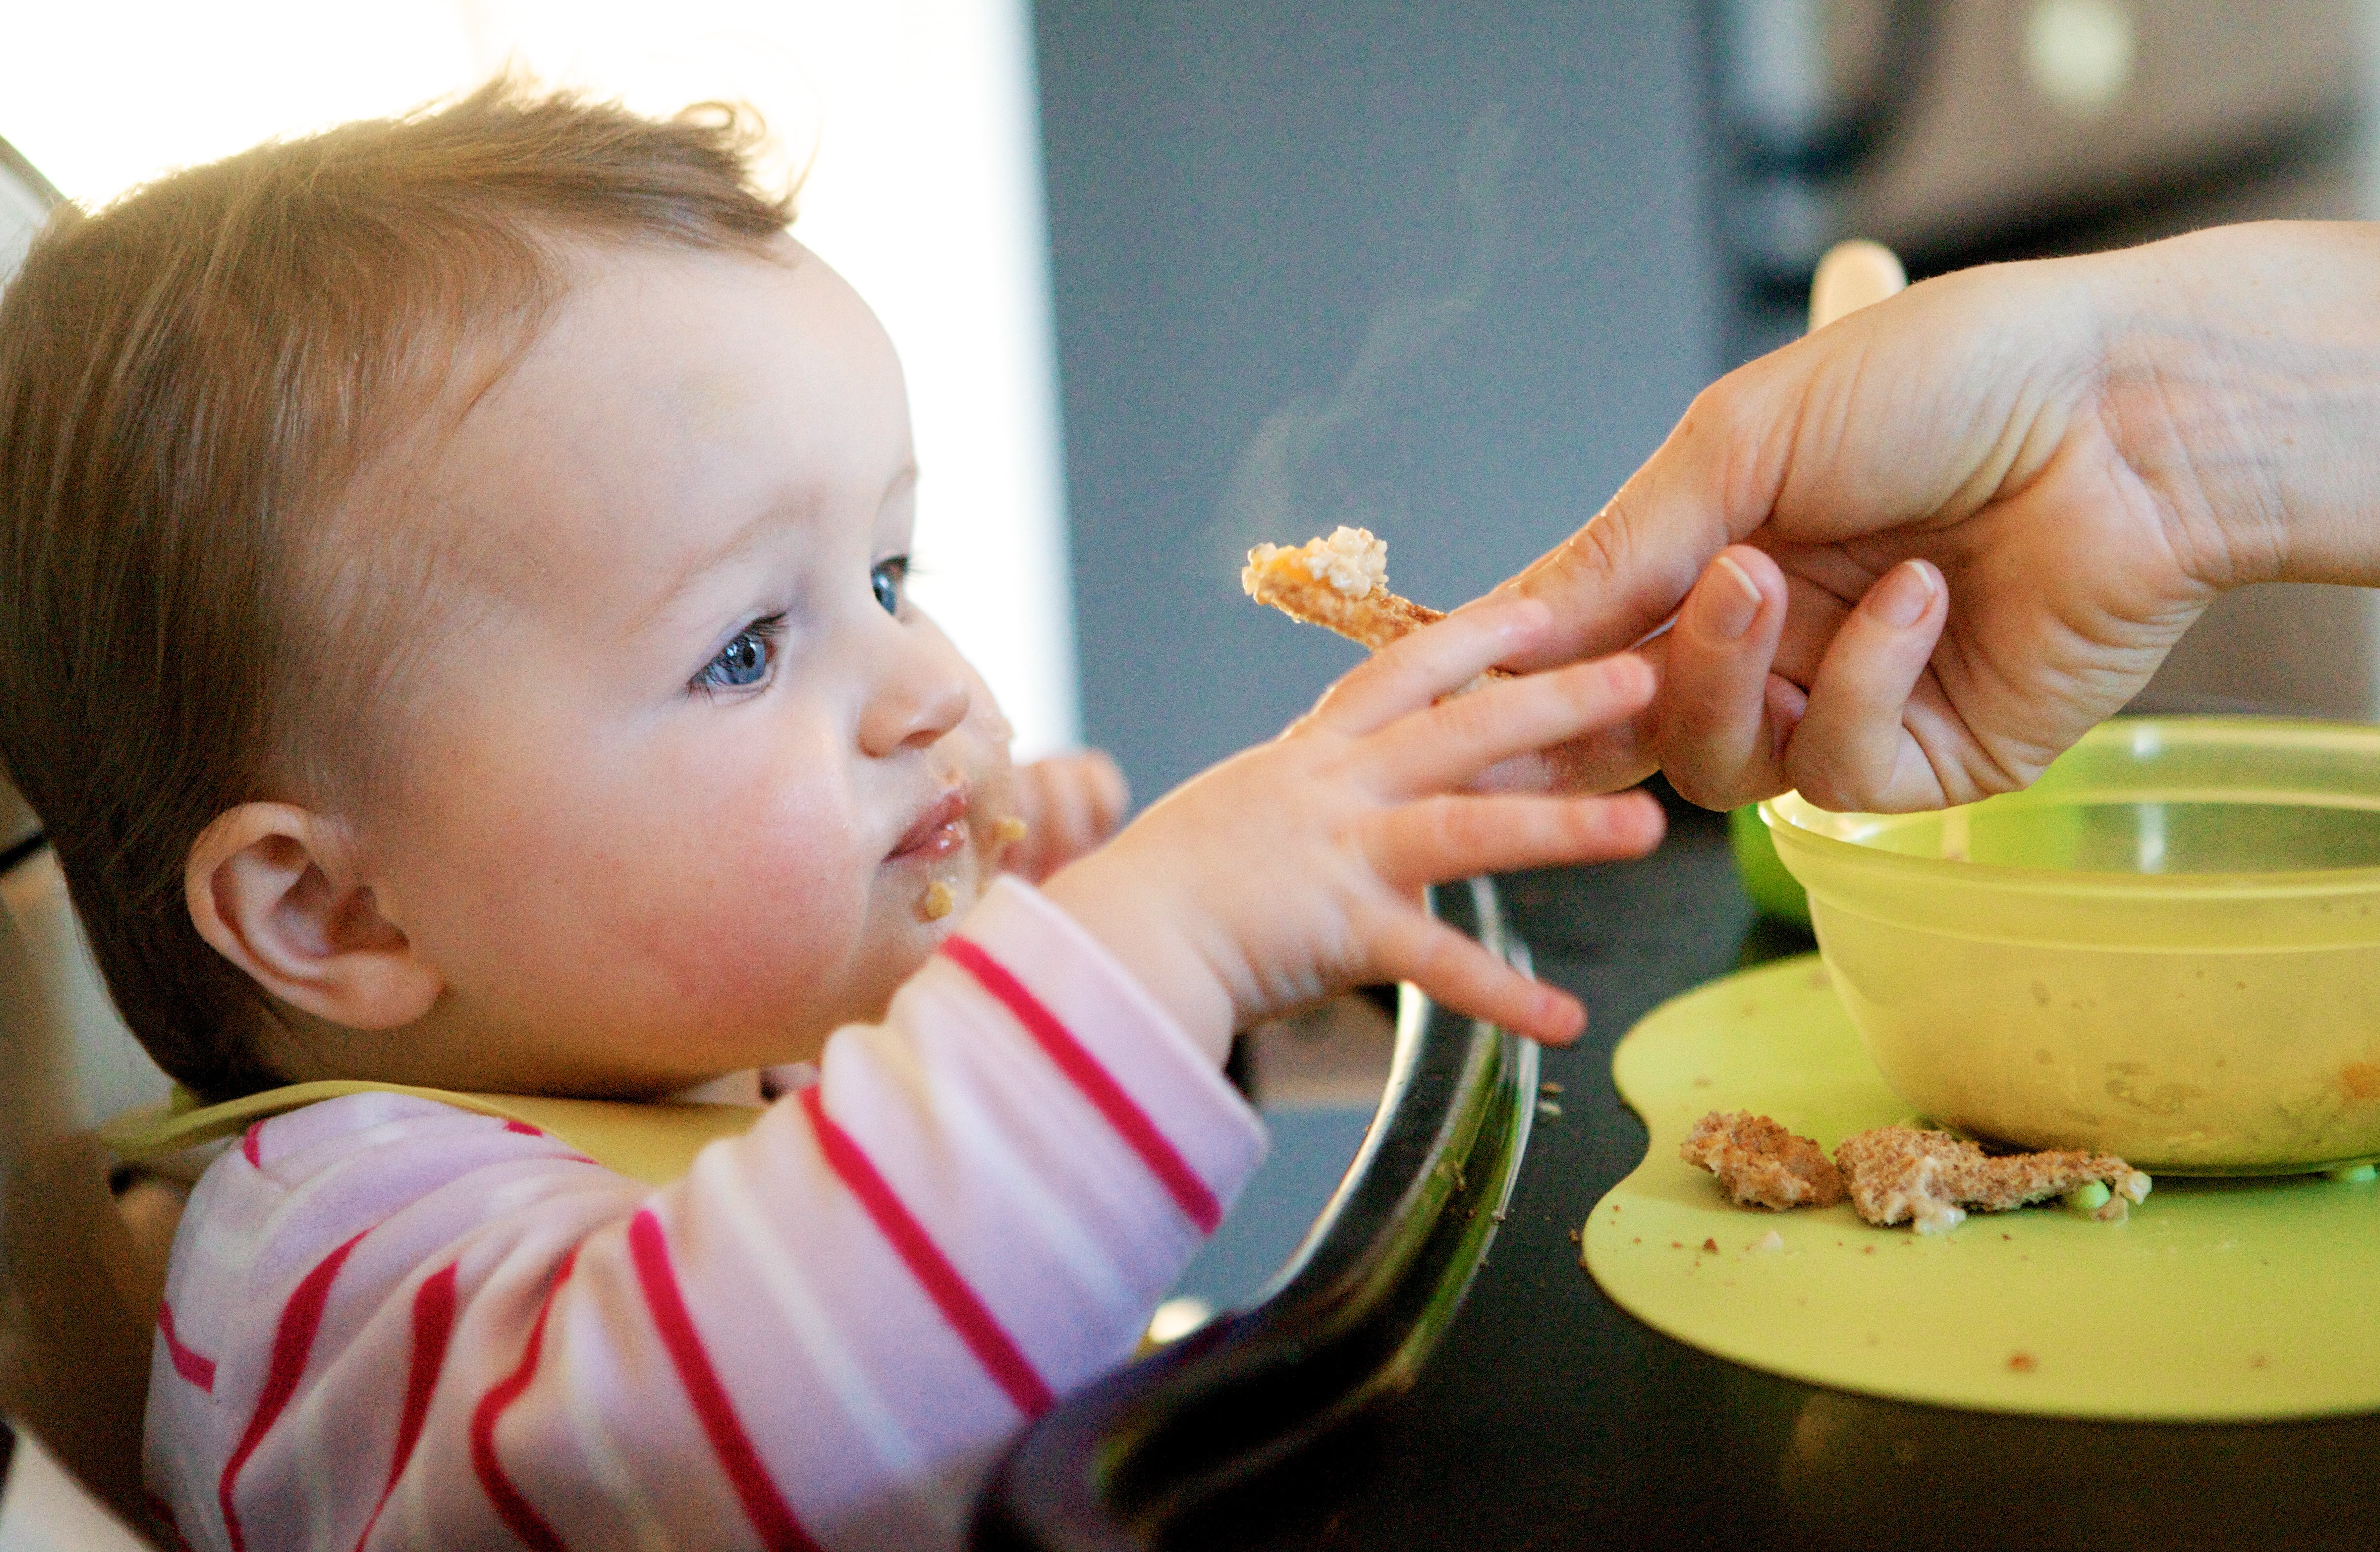 Little Spoon set to disrupt the baby food category